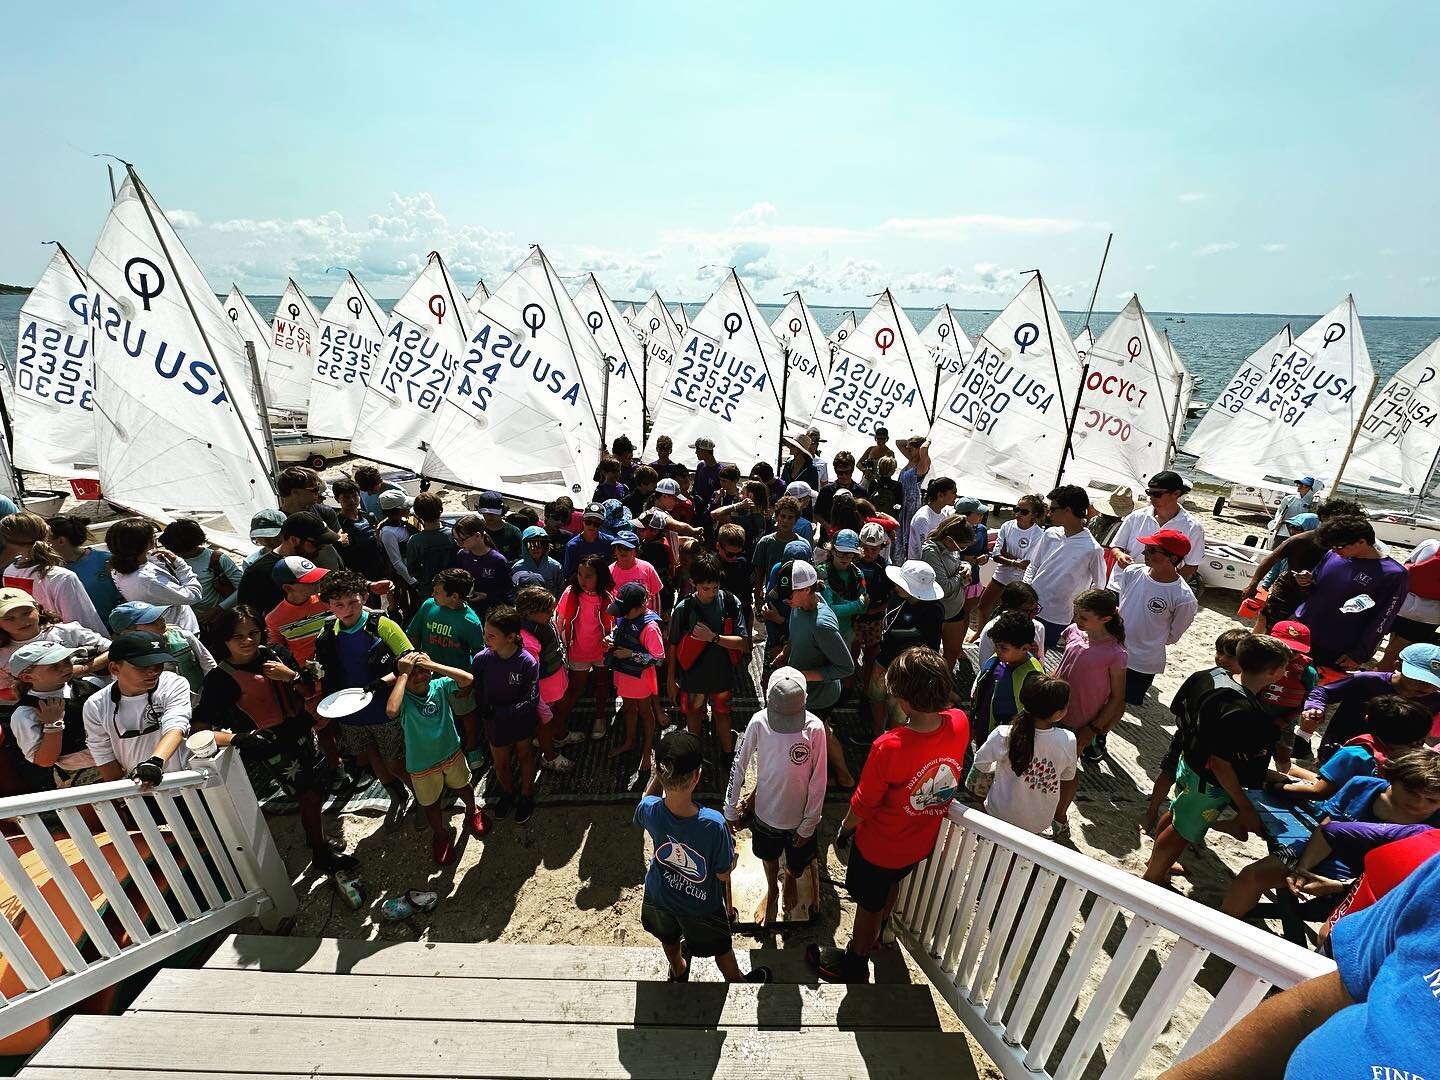 @mattituckyachtclub skippers meeting for 420s and Optis! Great a breeze for our young sailors today. #regatta #youthsailing #sailing #summer #northfork